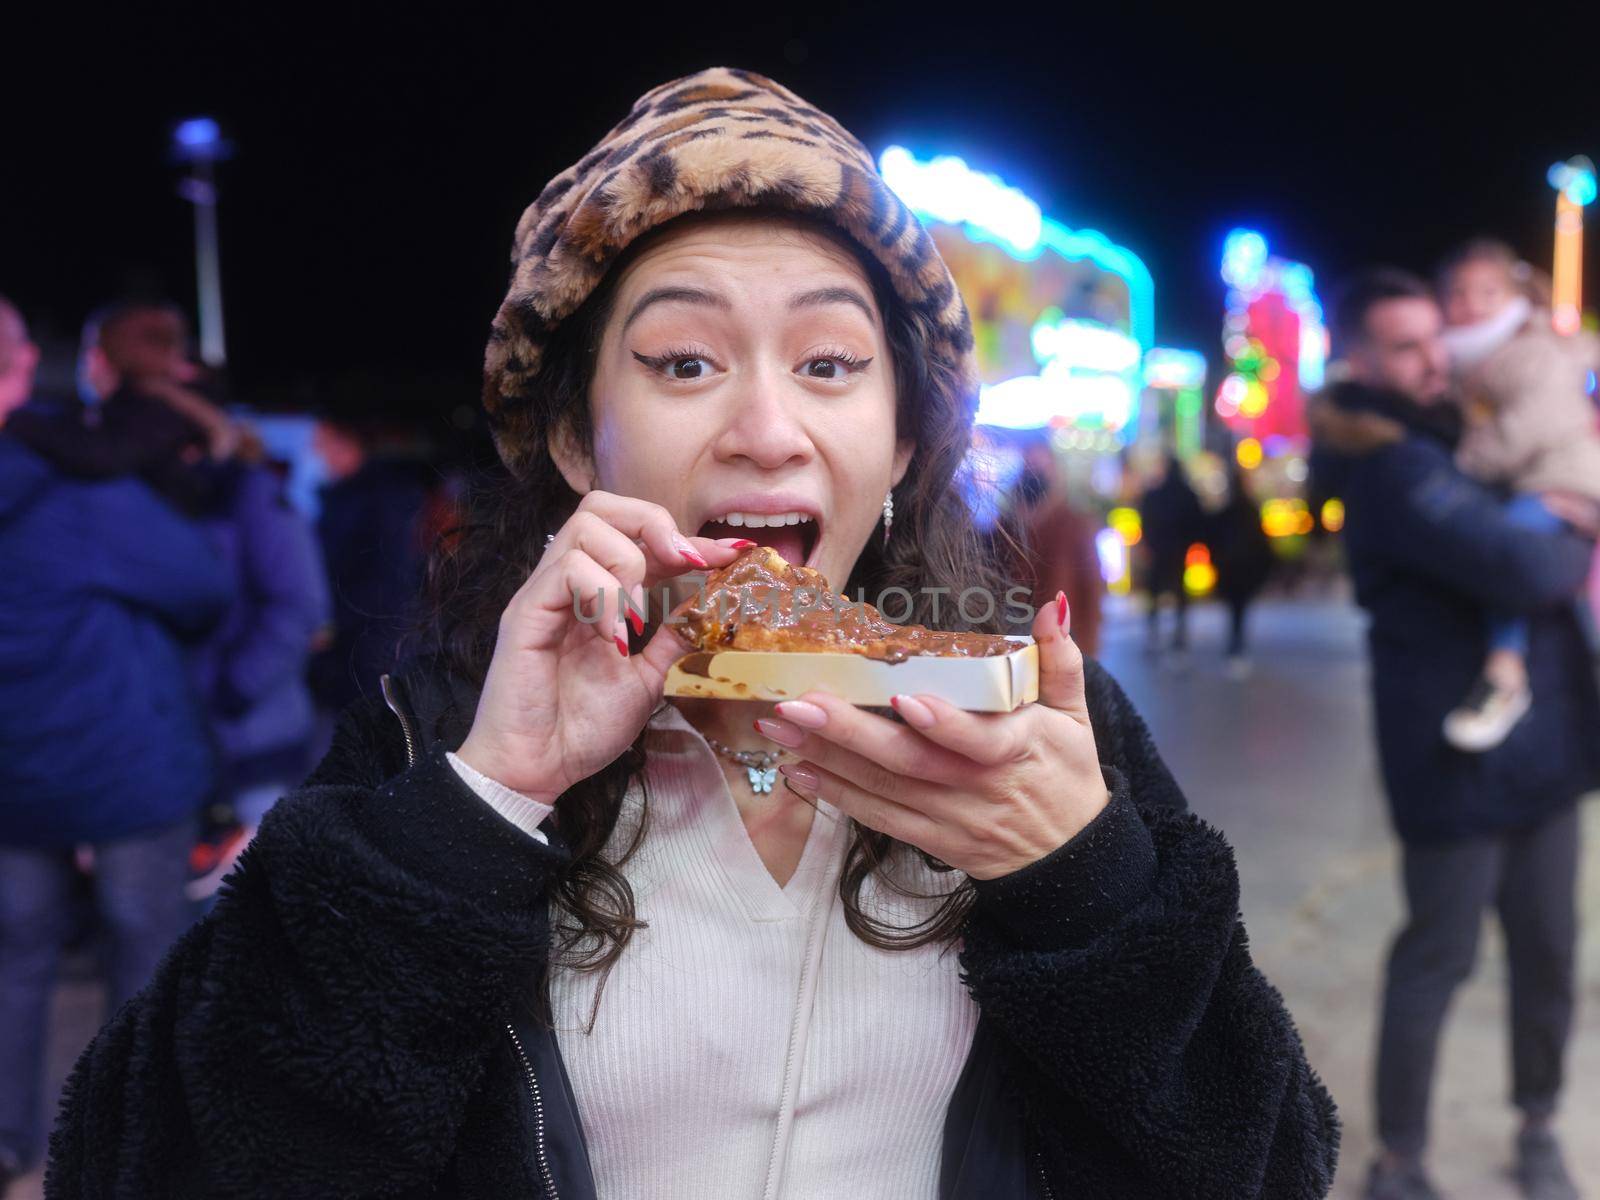 Woman eating a waffle with happy expression in the middle of a night fair by WesternExoticStockers